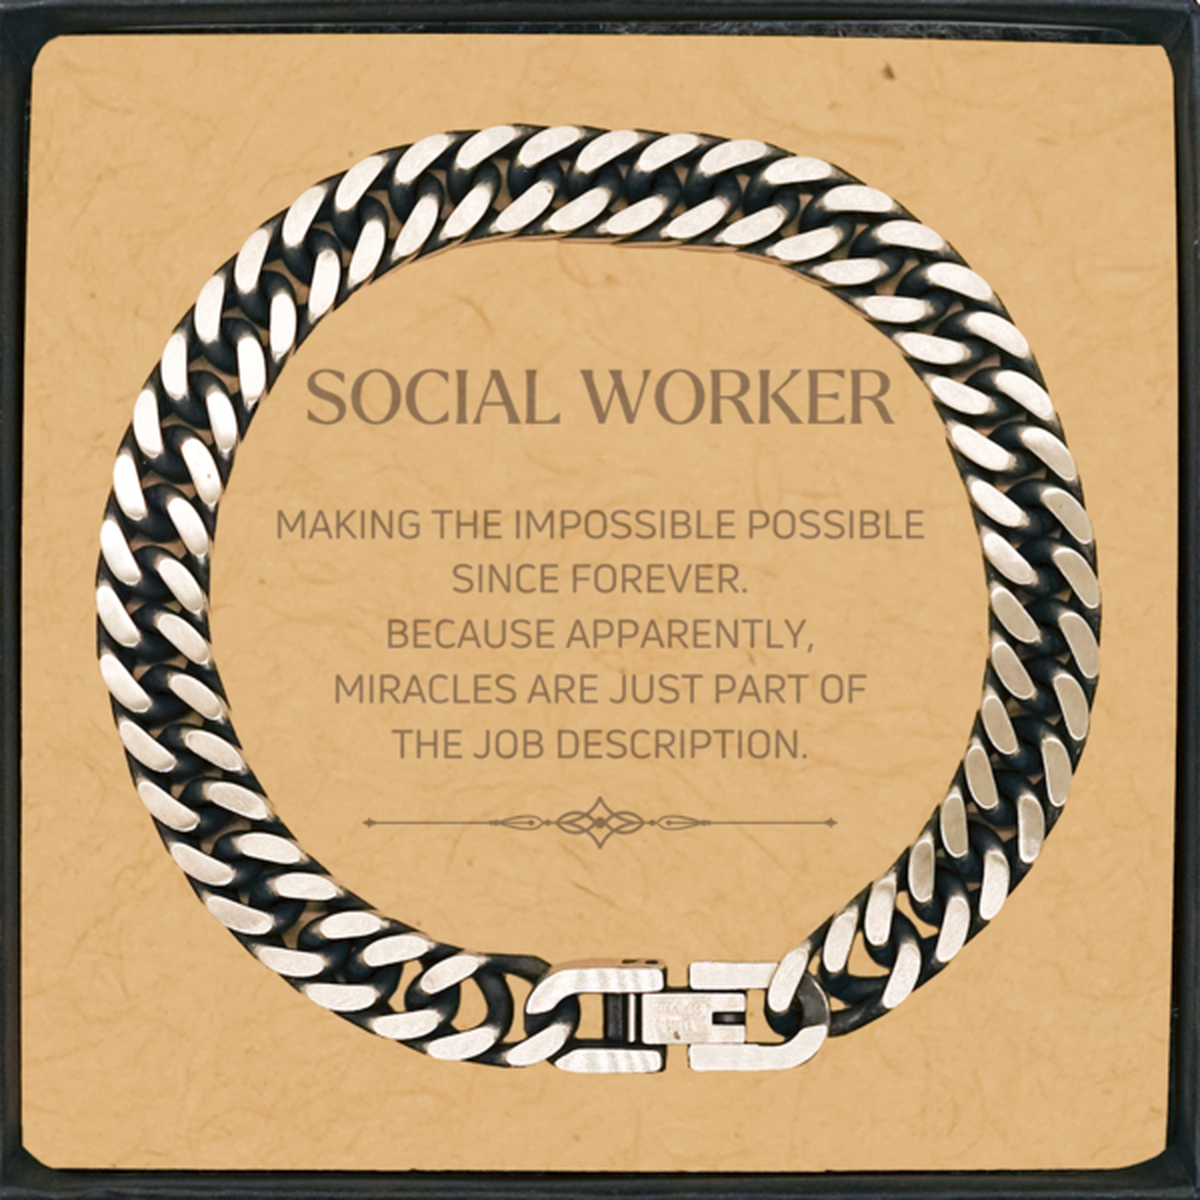 Funny Social Worker Gifts, Miracles are just part of the job description, Inspirational Birthday Cuban Link Chain Bracelet For Social Worker, Men, Women, Coworkers, Friends, Boss